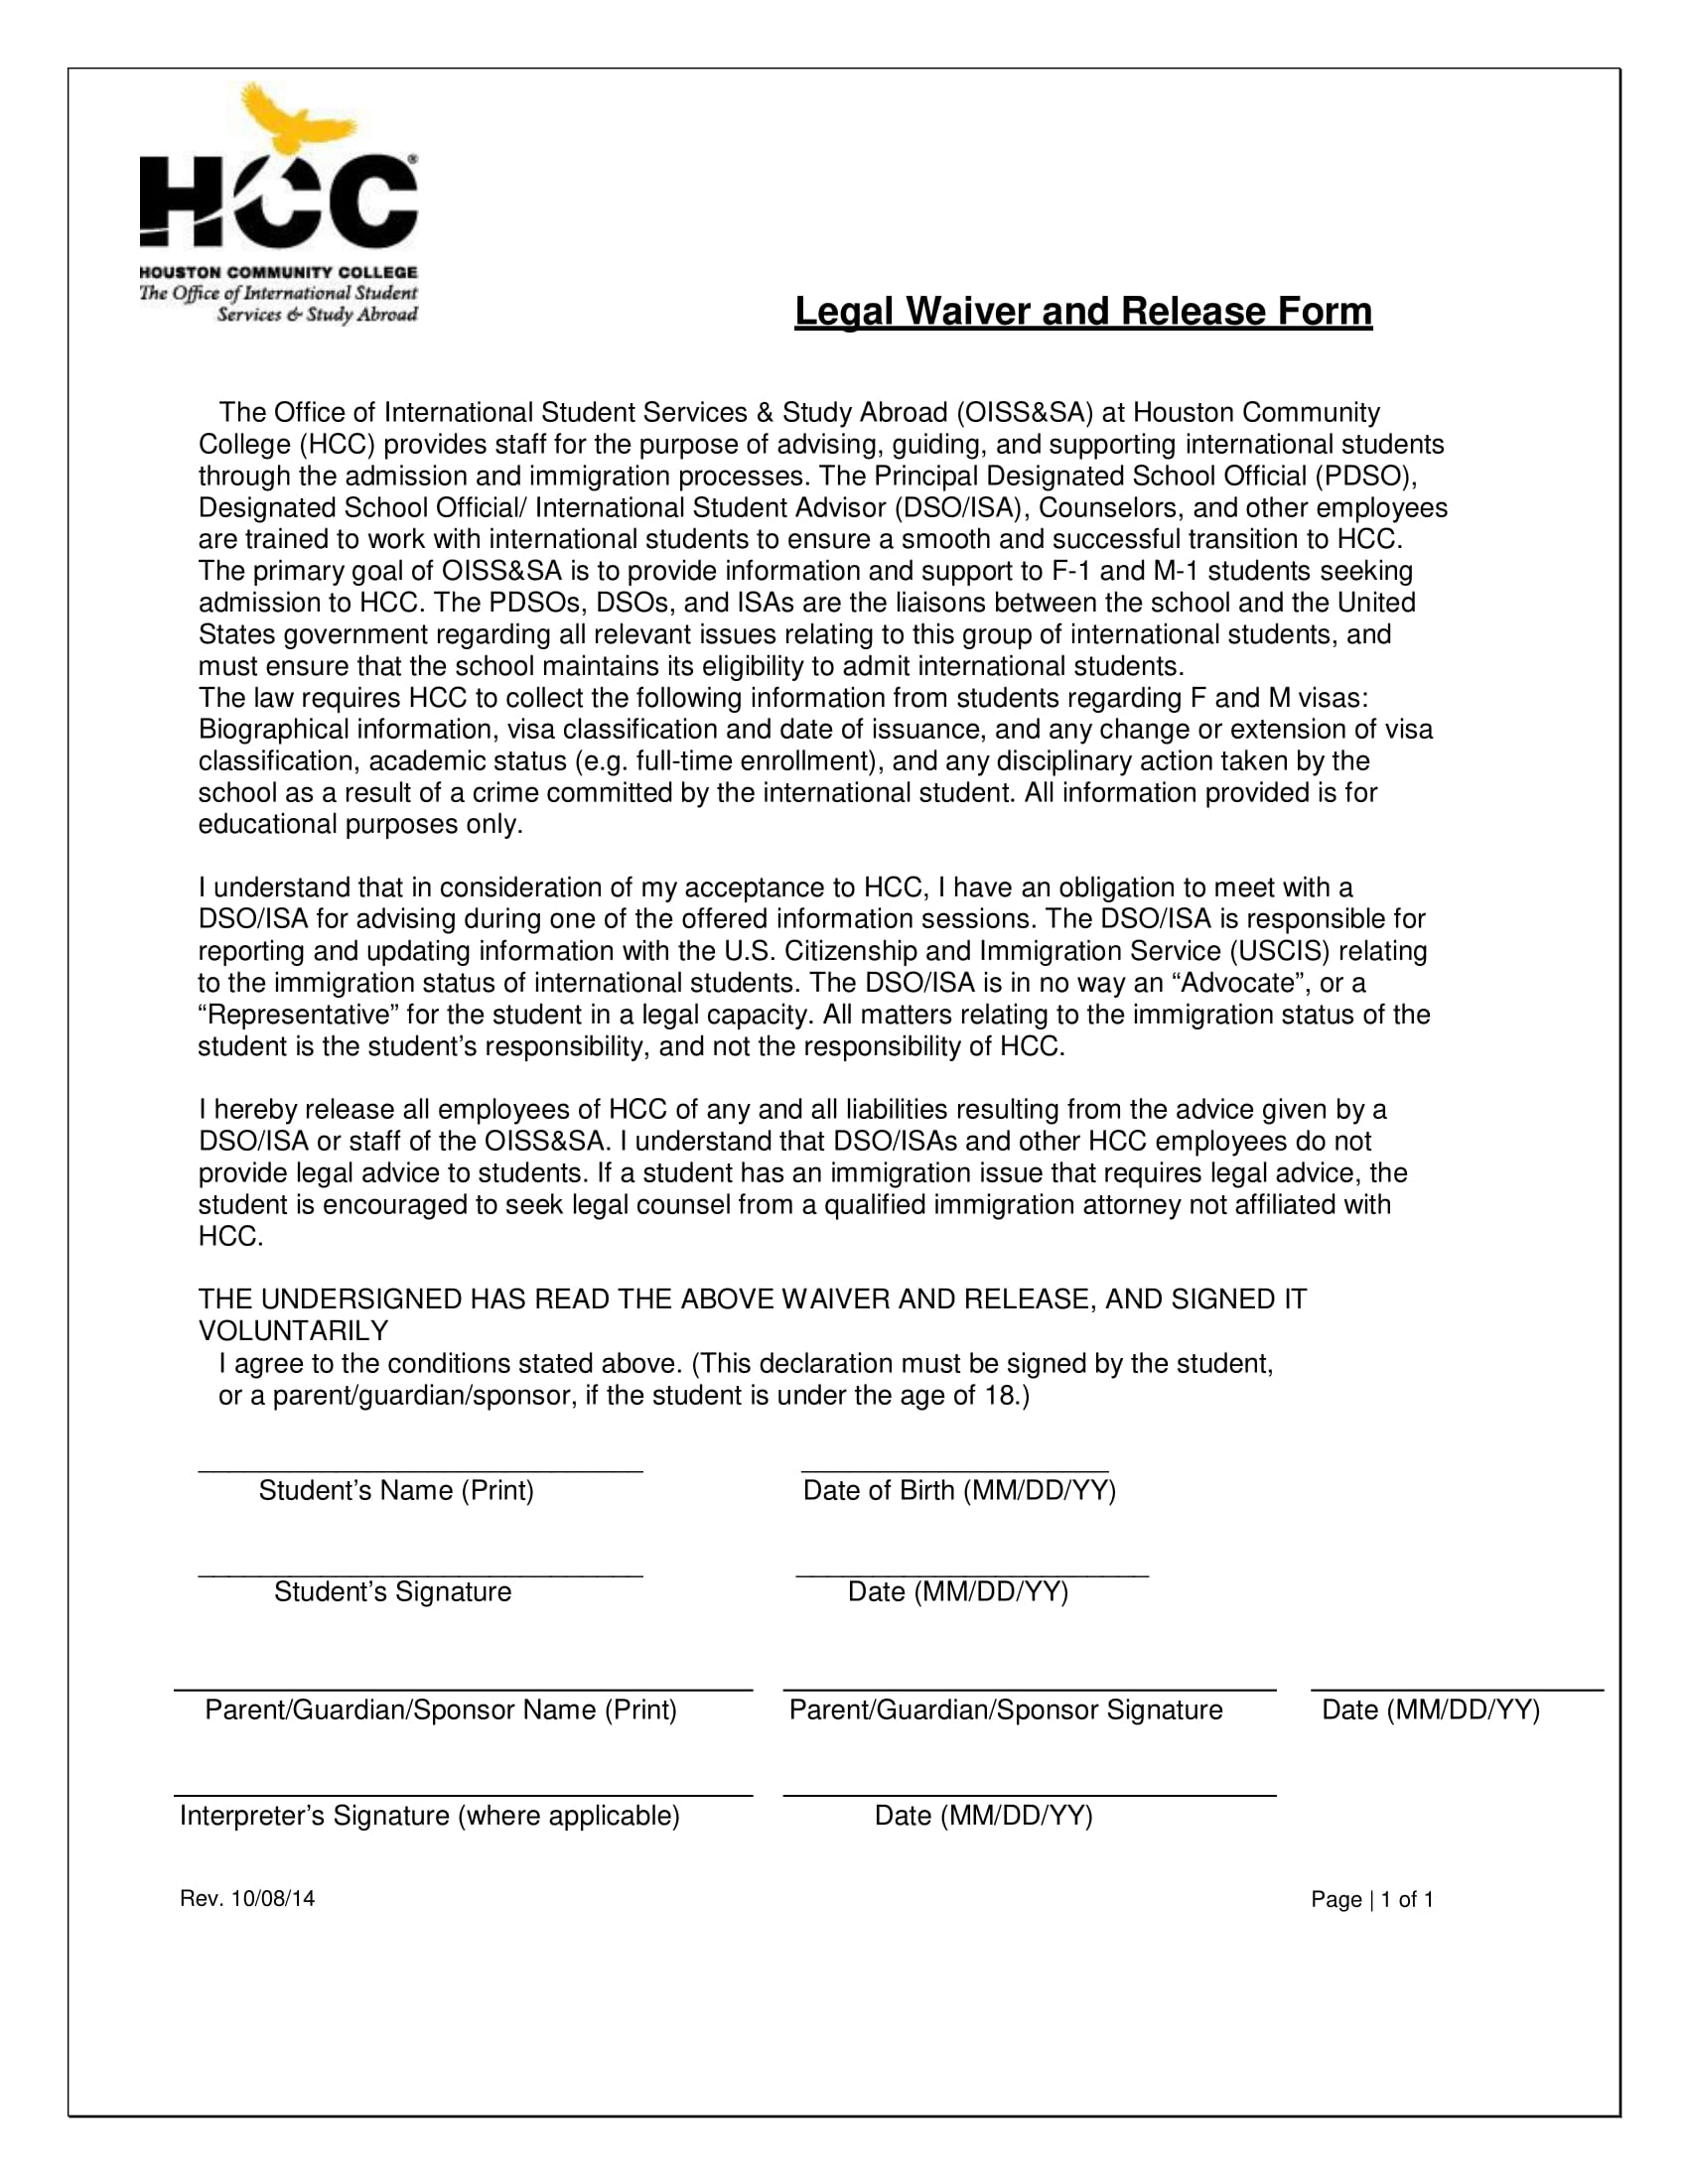 legal waiver and release form 1